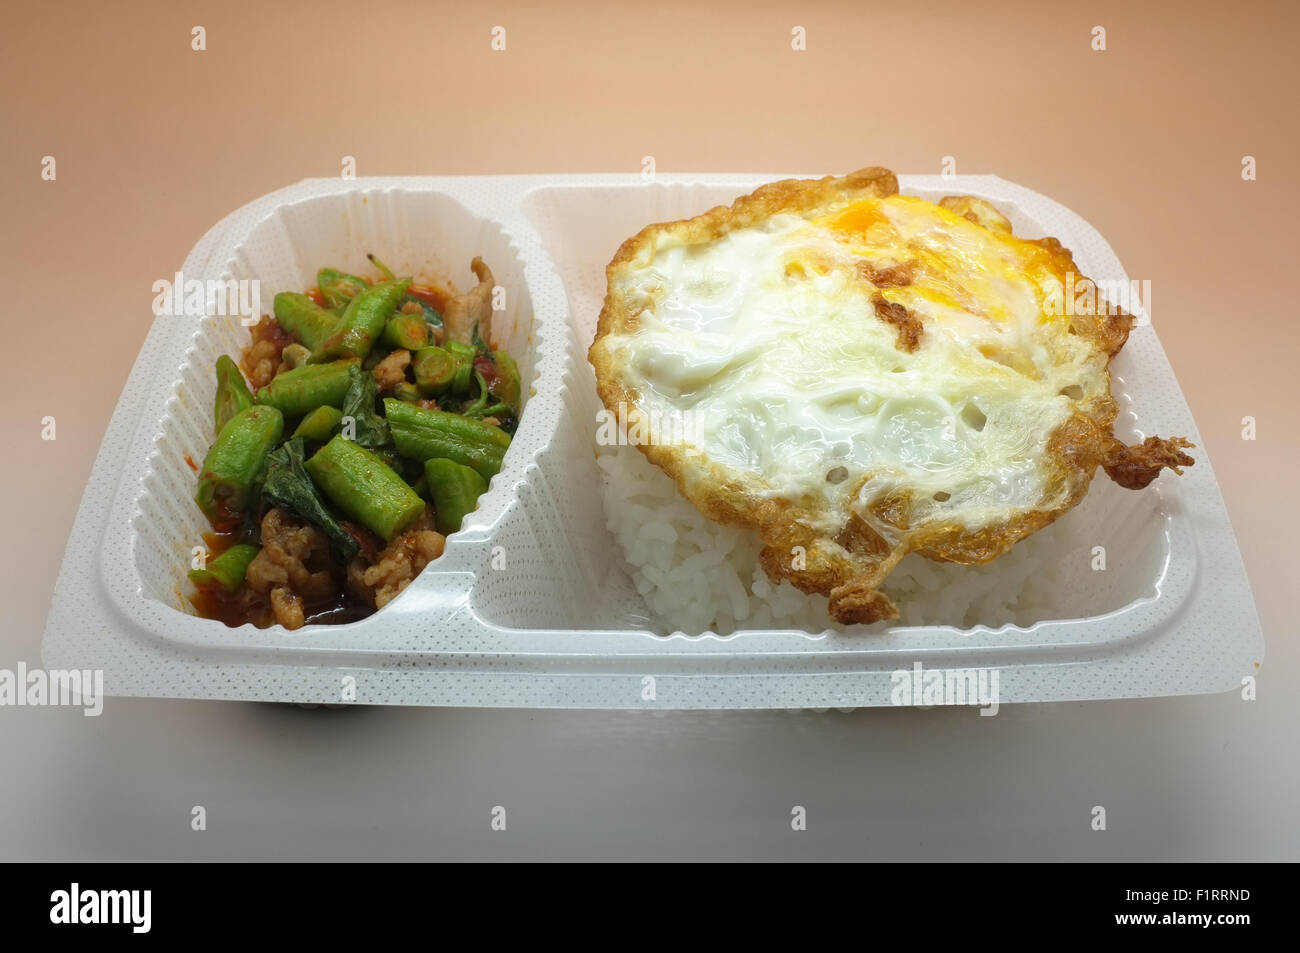 Thai food box, Fried egg over rice with stir fried chicken and vegetable Stock Photo